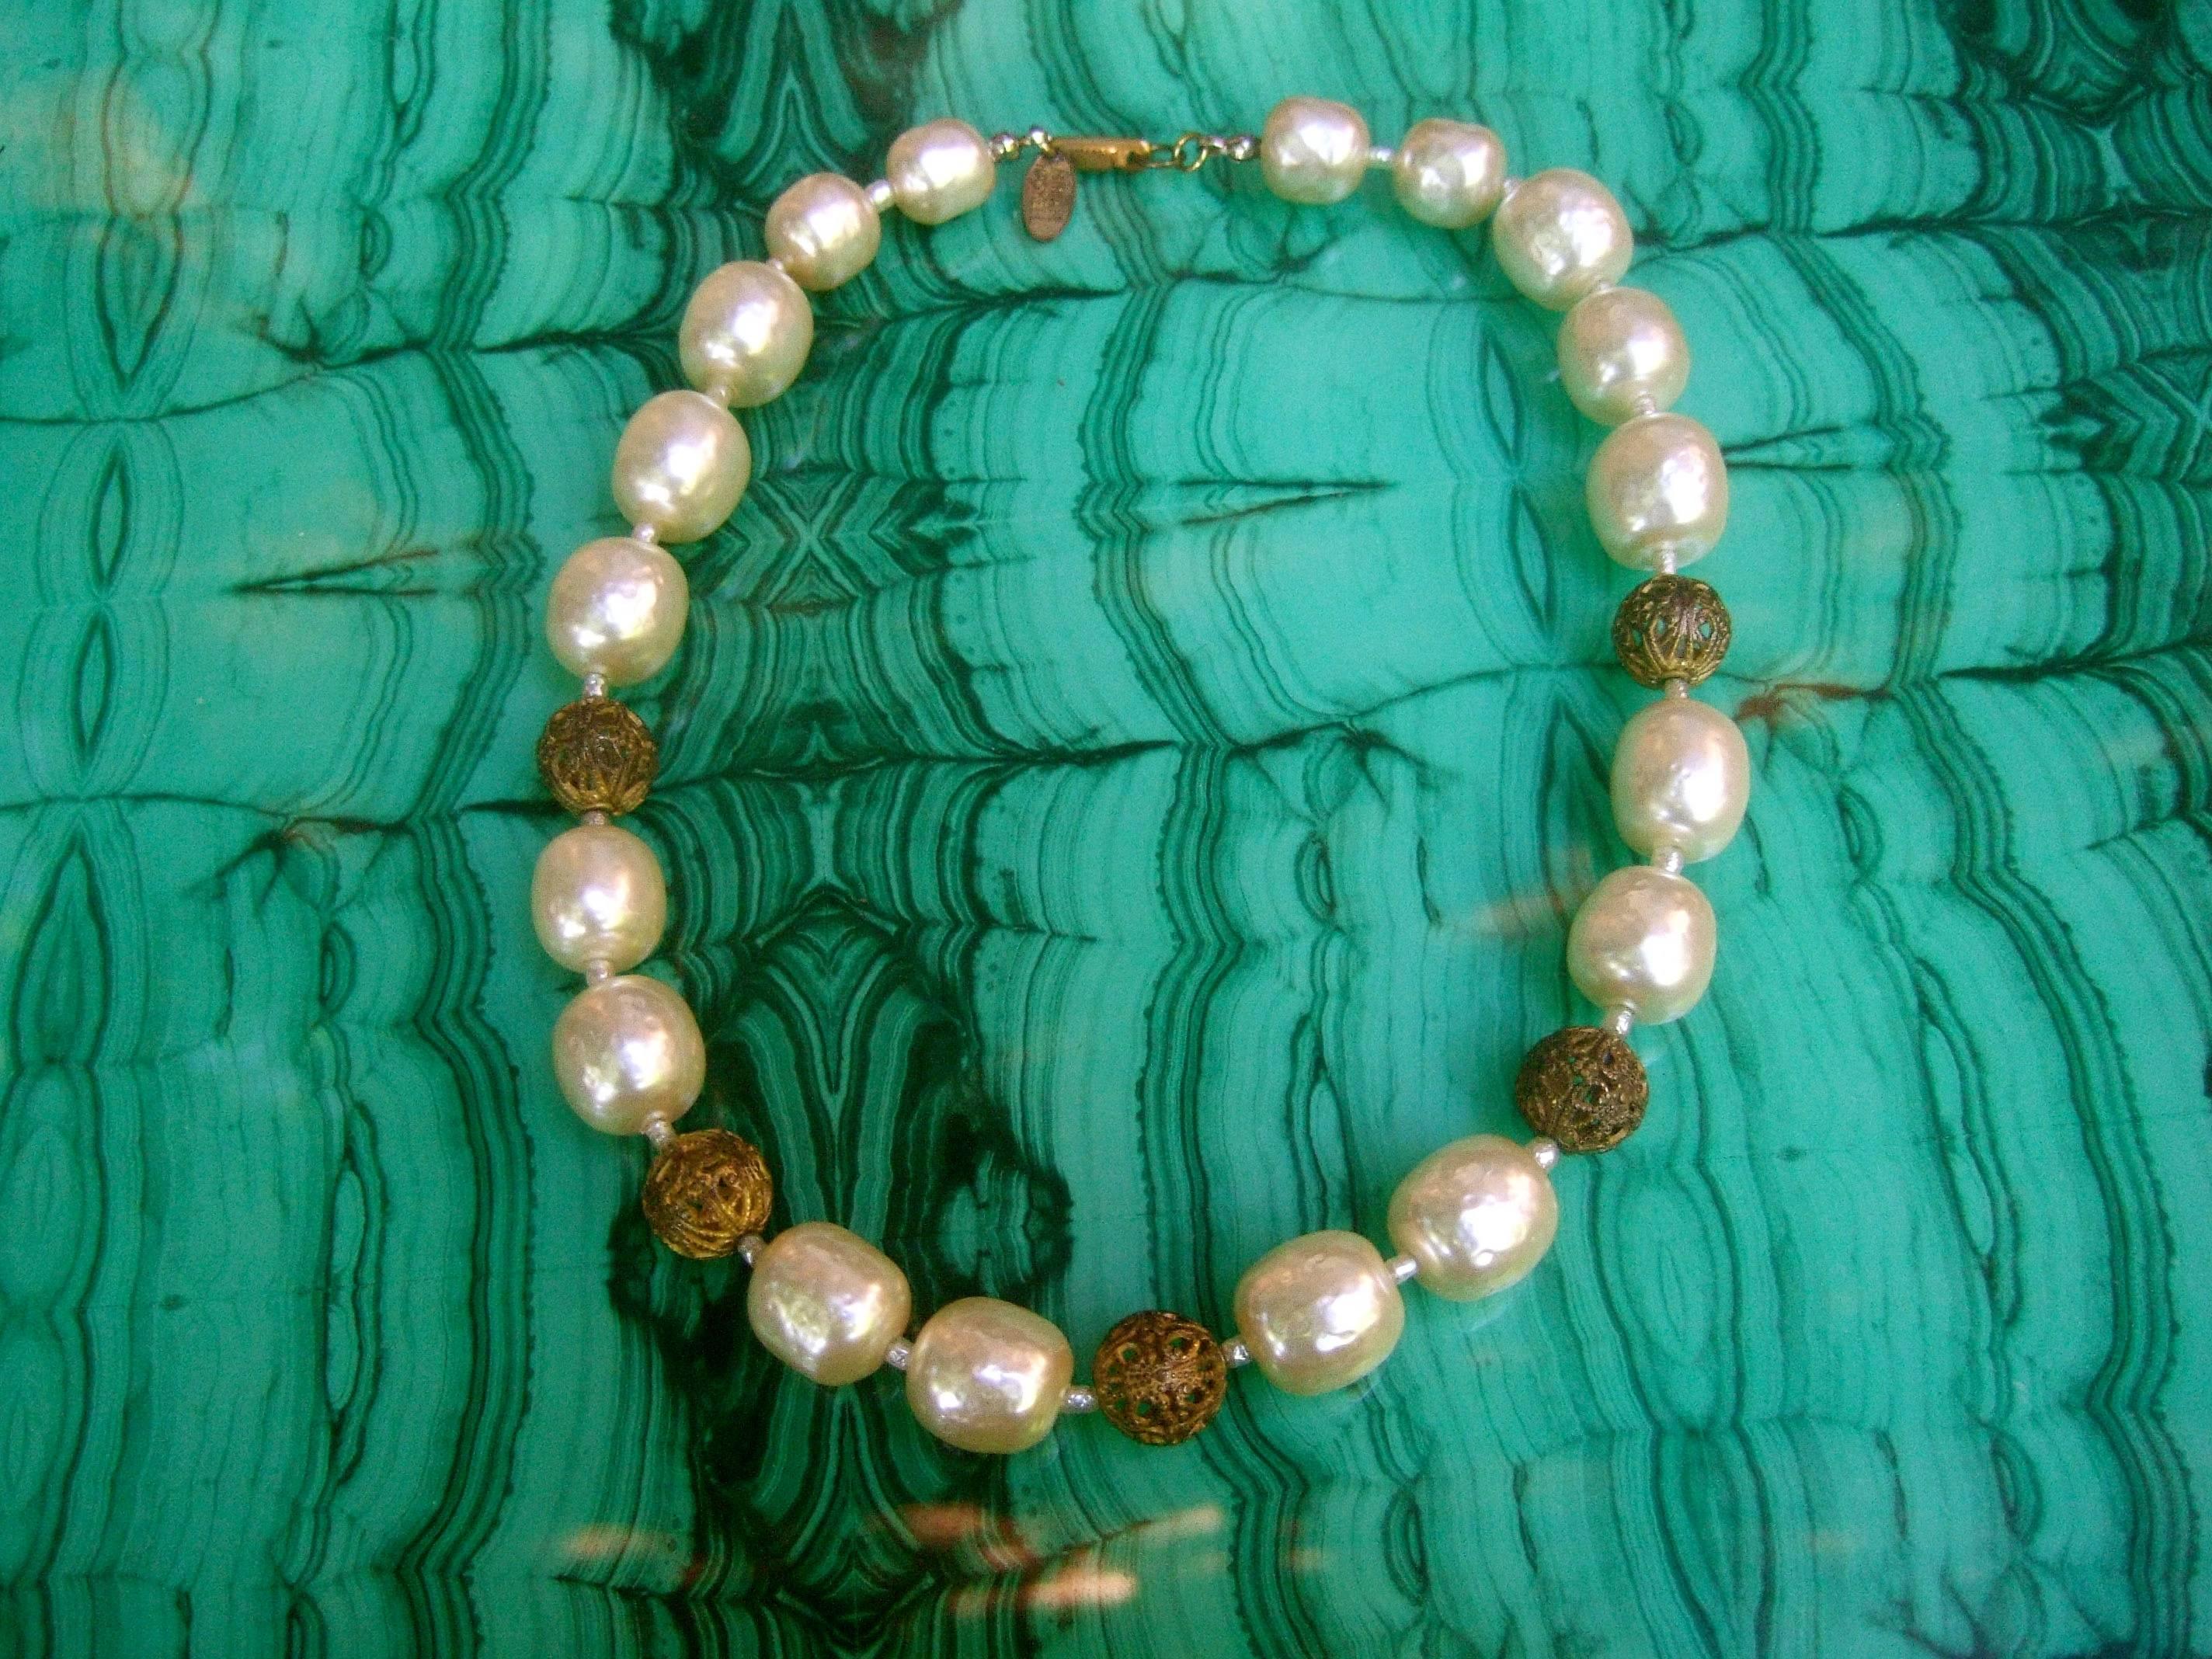 Miriam Haskell Elegant baroque glass enamel pearl choker necklace
The designer costume necklace is designed with a strand
of lustrous baroque style almond shaped glass enamel pearls 

Interspersed within the glass pearls are smaller seed pearl